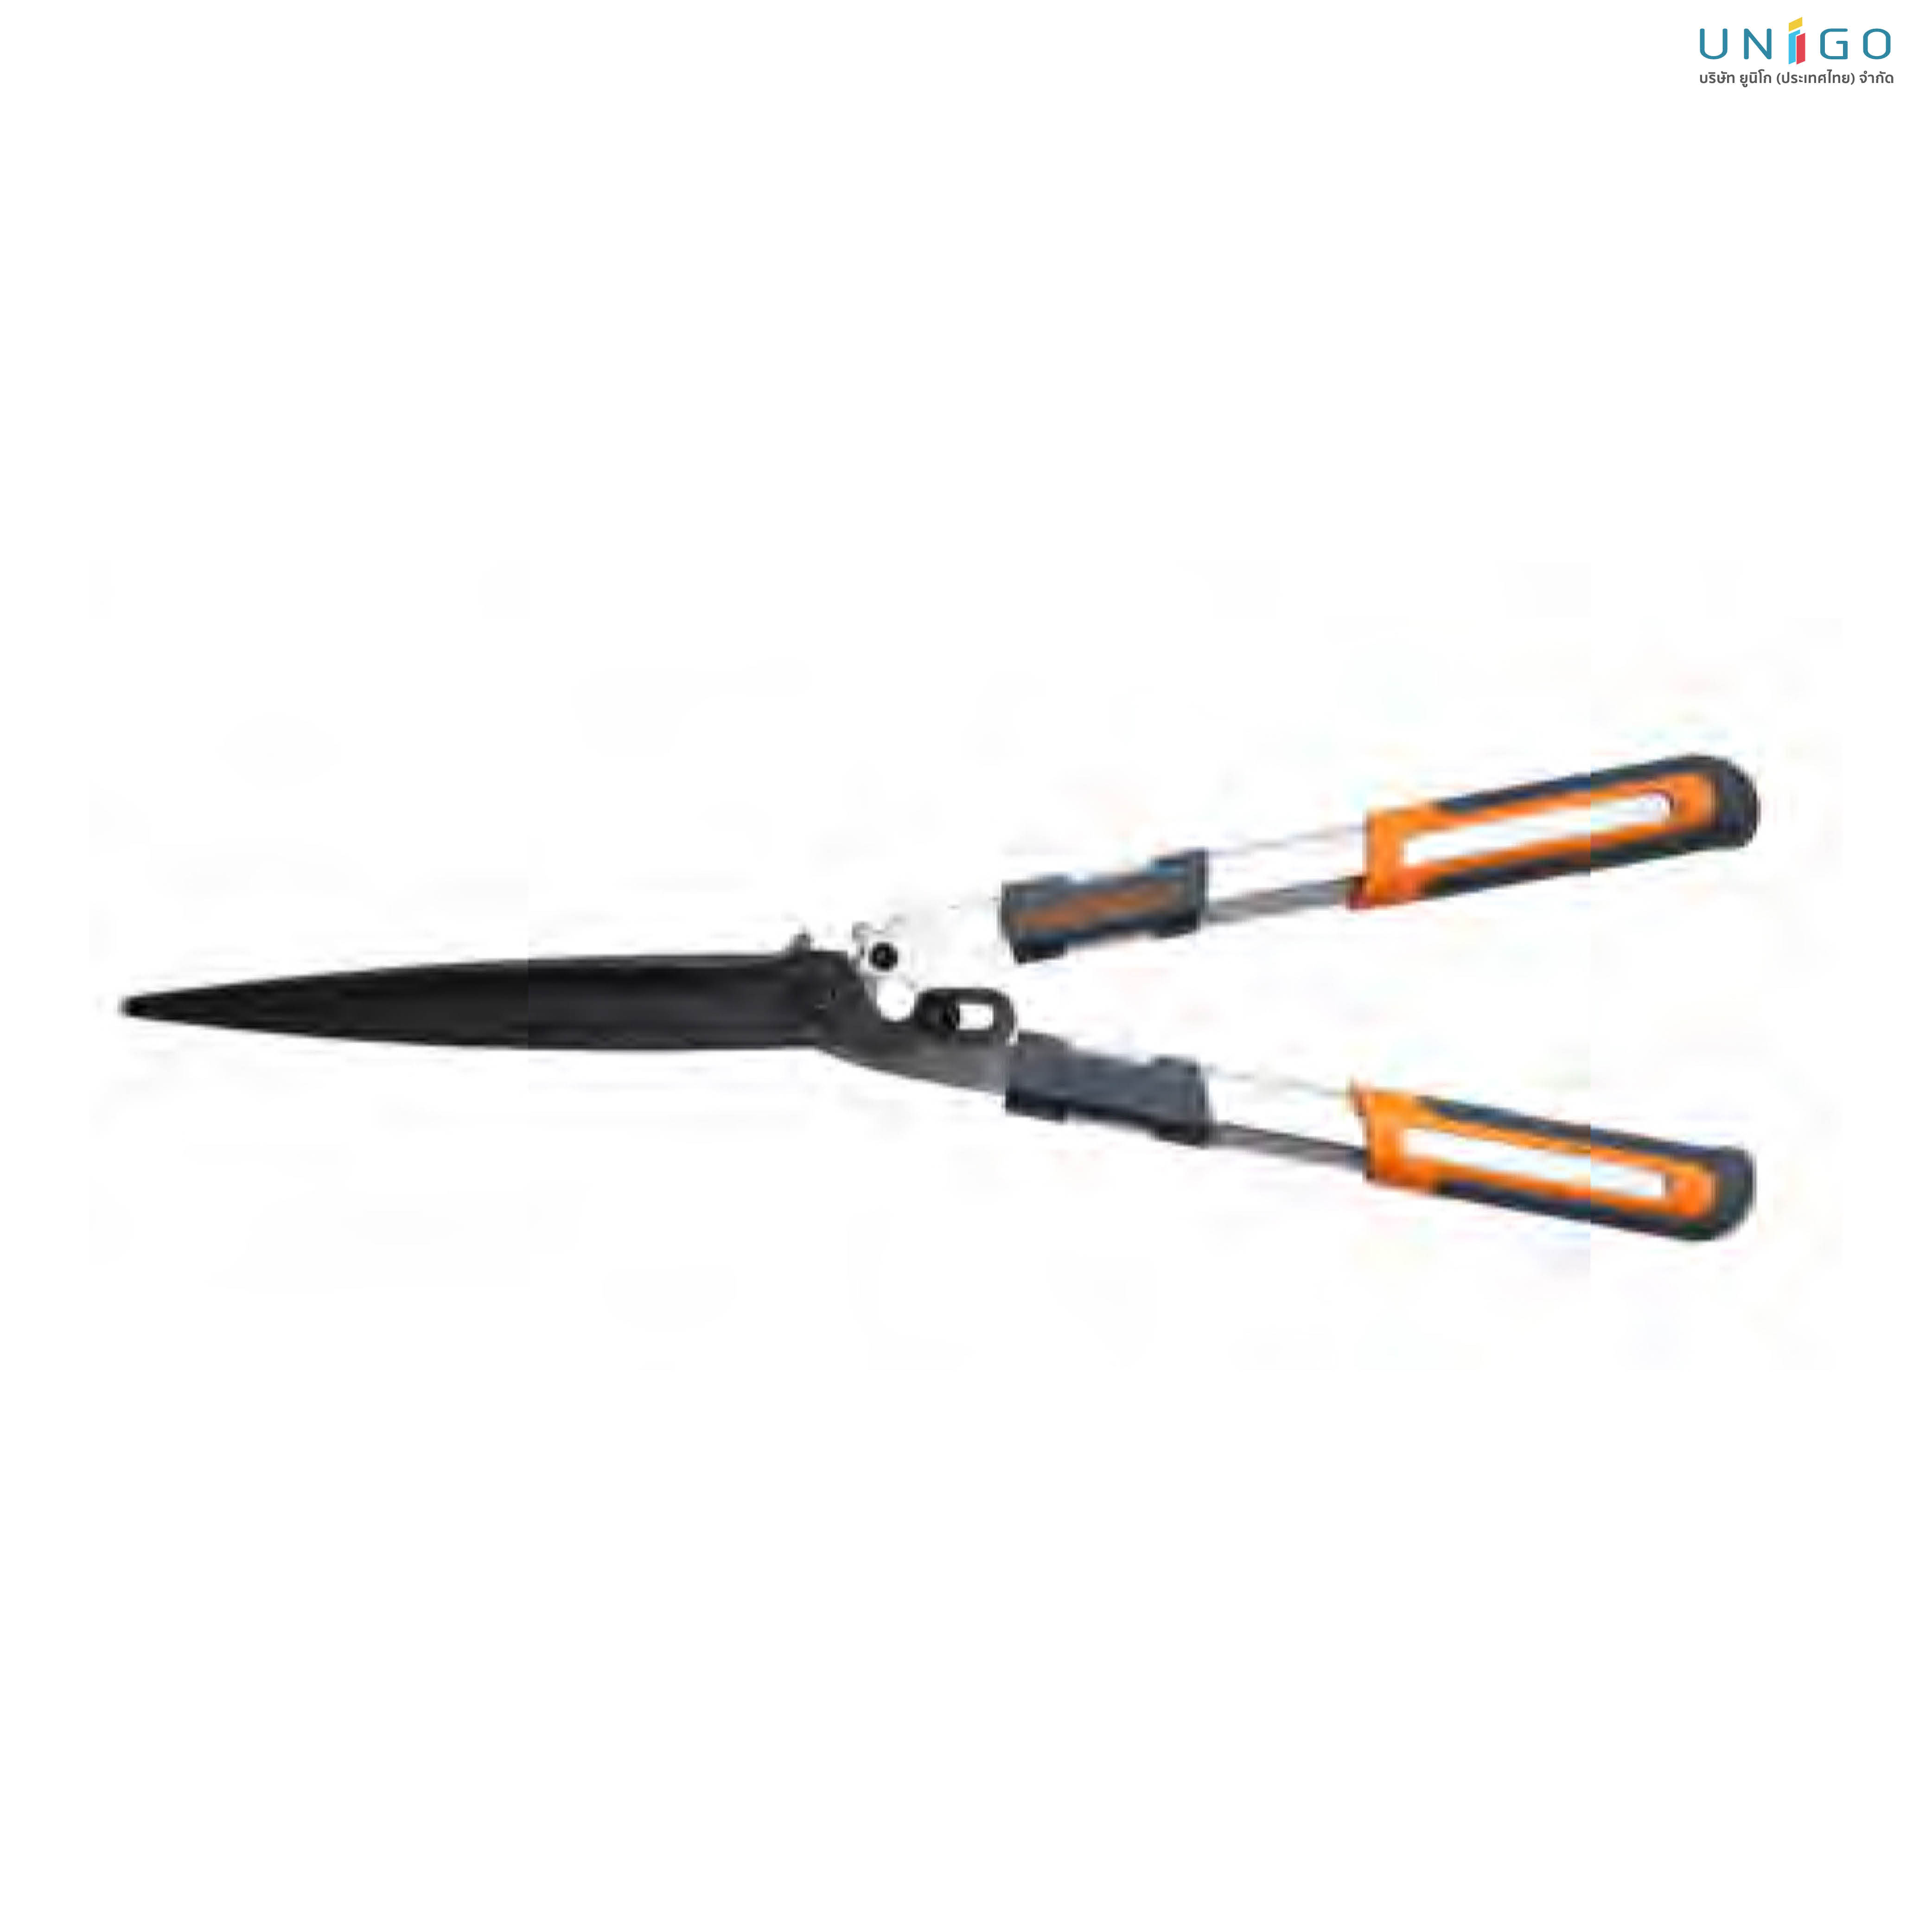 27.5" STRAIGHT BLADE GEAR ACTION HEDGE SHEARS